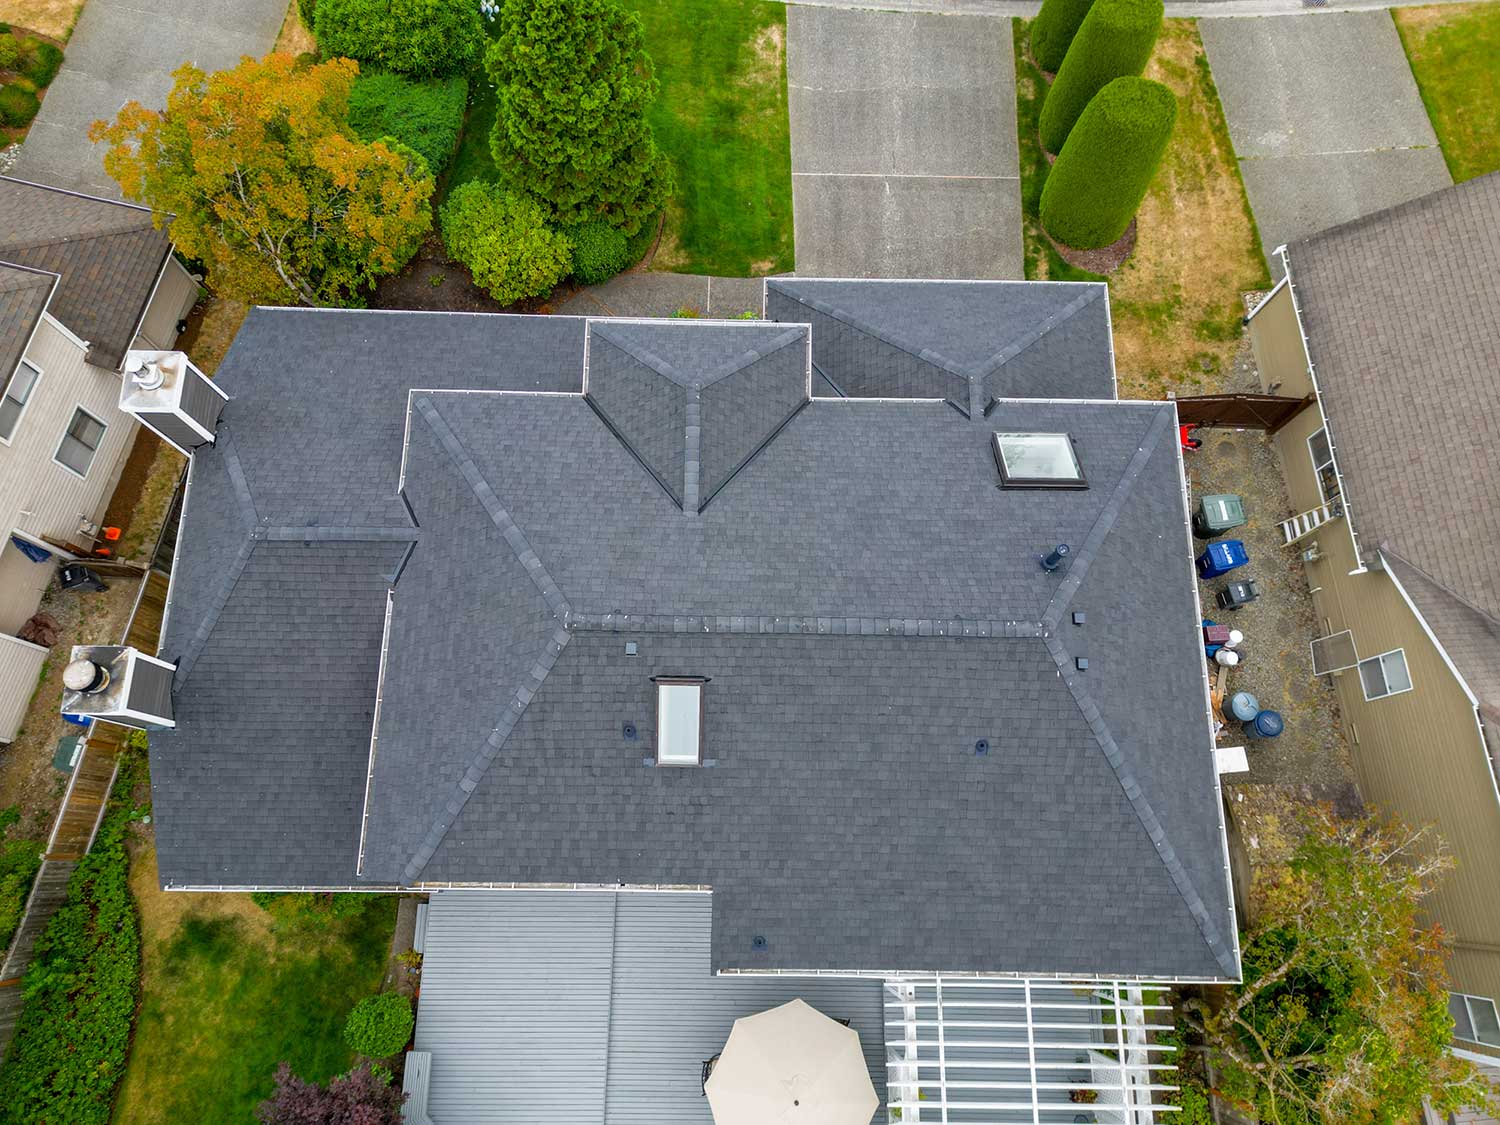 Composite Shingles Roof, Bothell, Washington - close up overhead view of roof